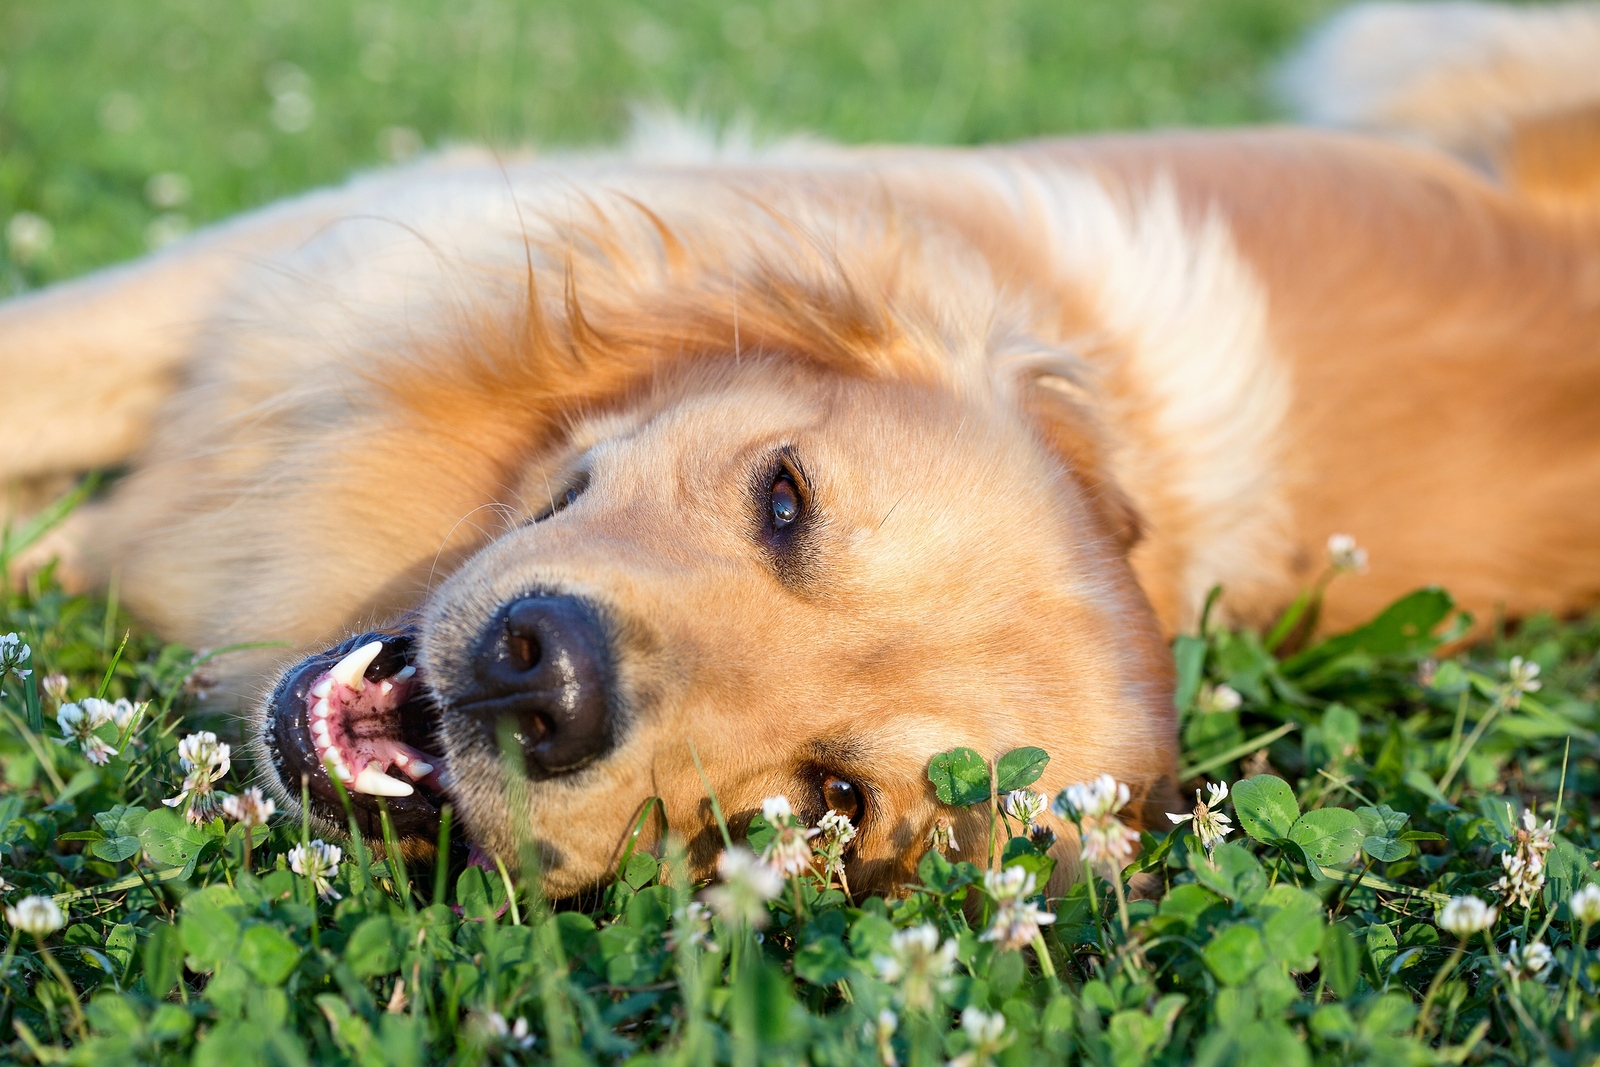 Are you worried about your pet getting fleas, ticks or heartworms? Learn about pet parasite prevention with our veterinarian in Fairfax; call us today!